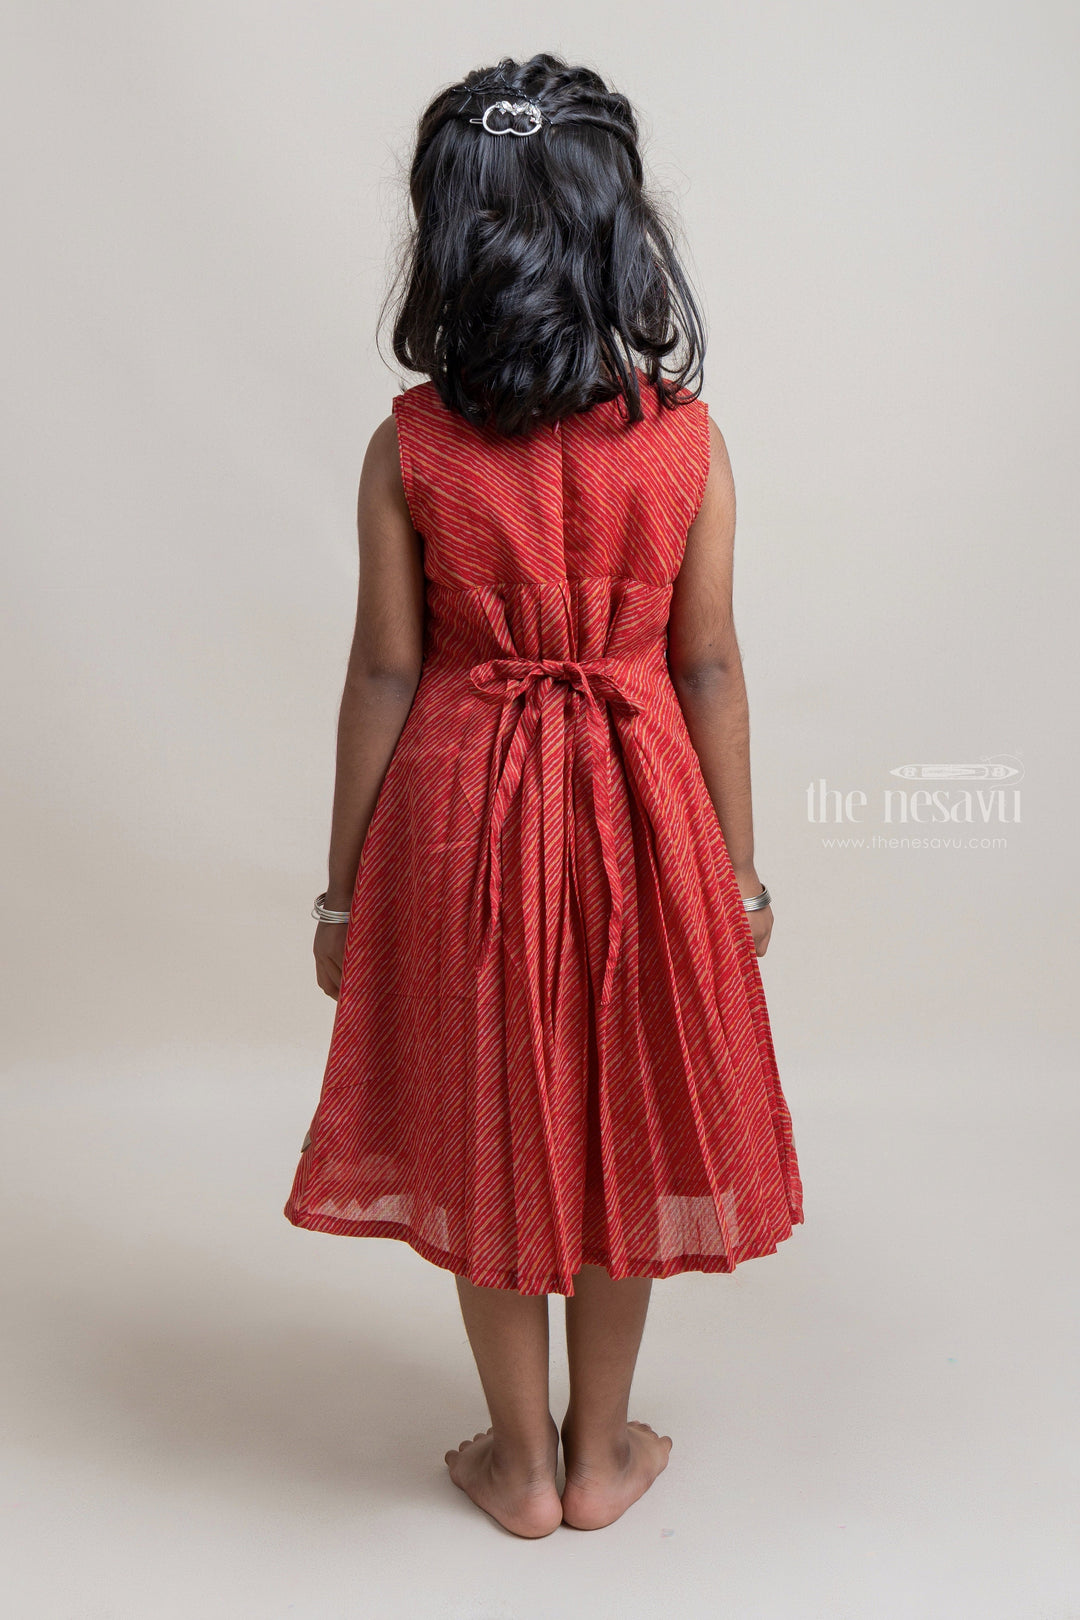 The Nesavu Girls Cotton Frock Stunning Red Sleeveless Pleated Cross Line Printed Frock For Girls Nesavu Latest Collection For Girls | Fancy Frock For Girls | The Nesavu